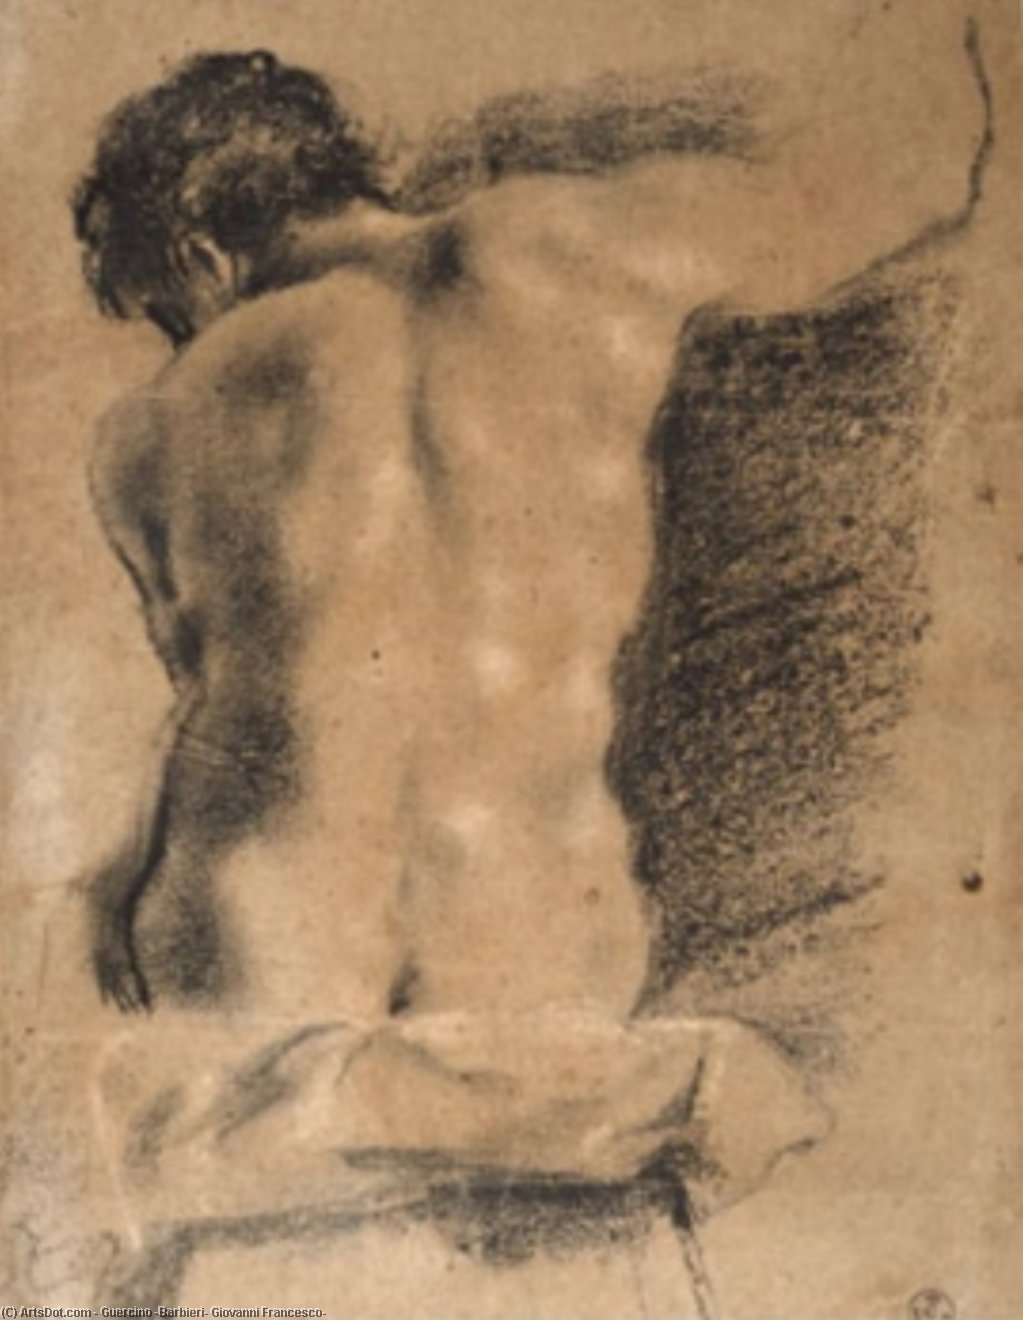 WikiOO.org - 백과 사전 - 회화, 삽화 Guercino (Barbieri, Giovanni Francesco) - Sitting young man from behind